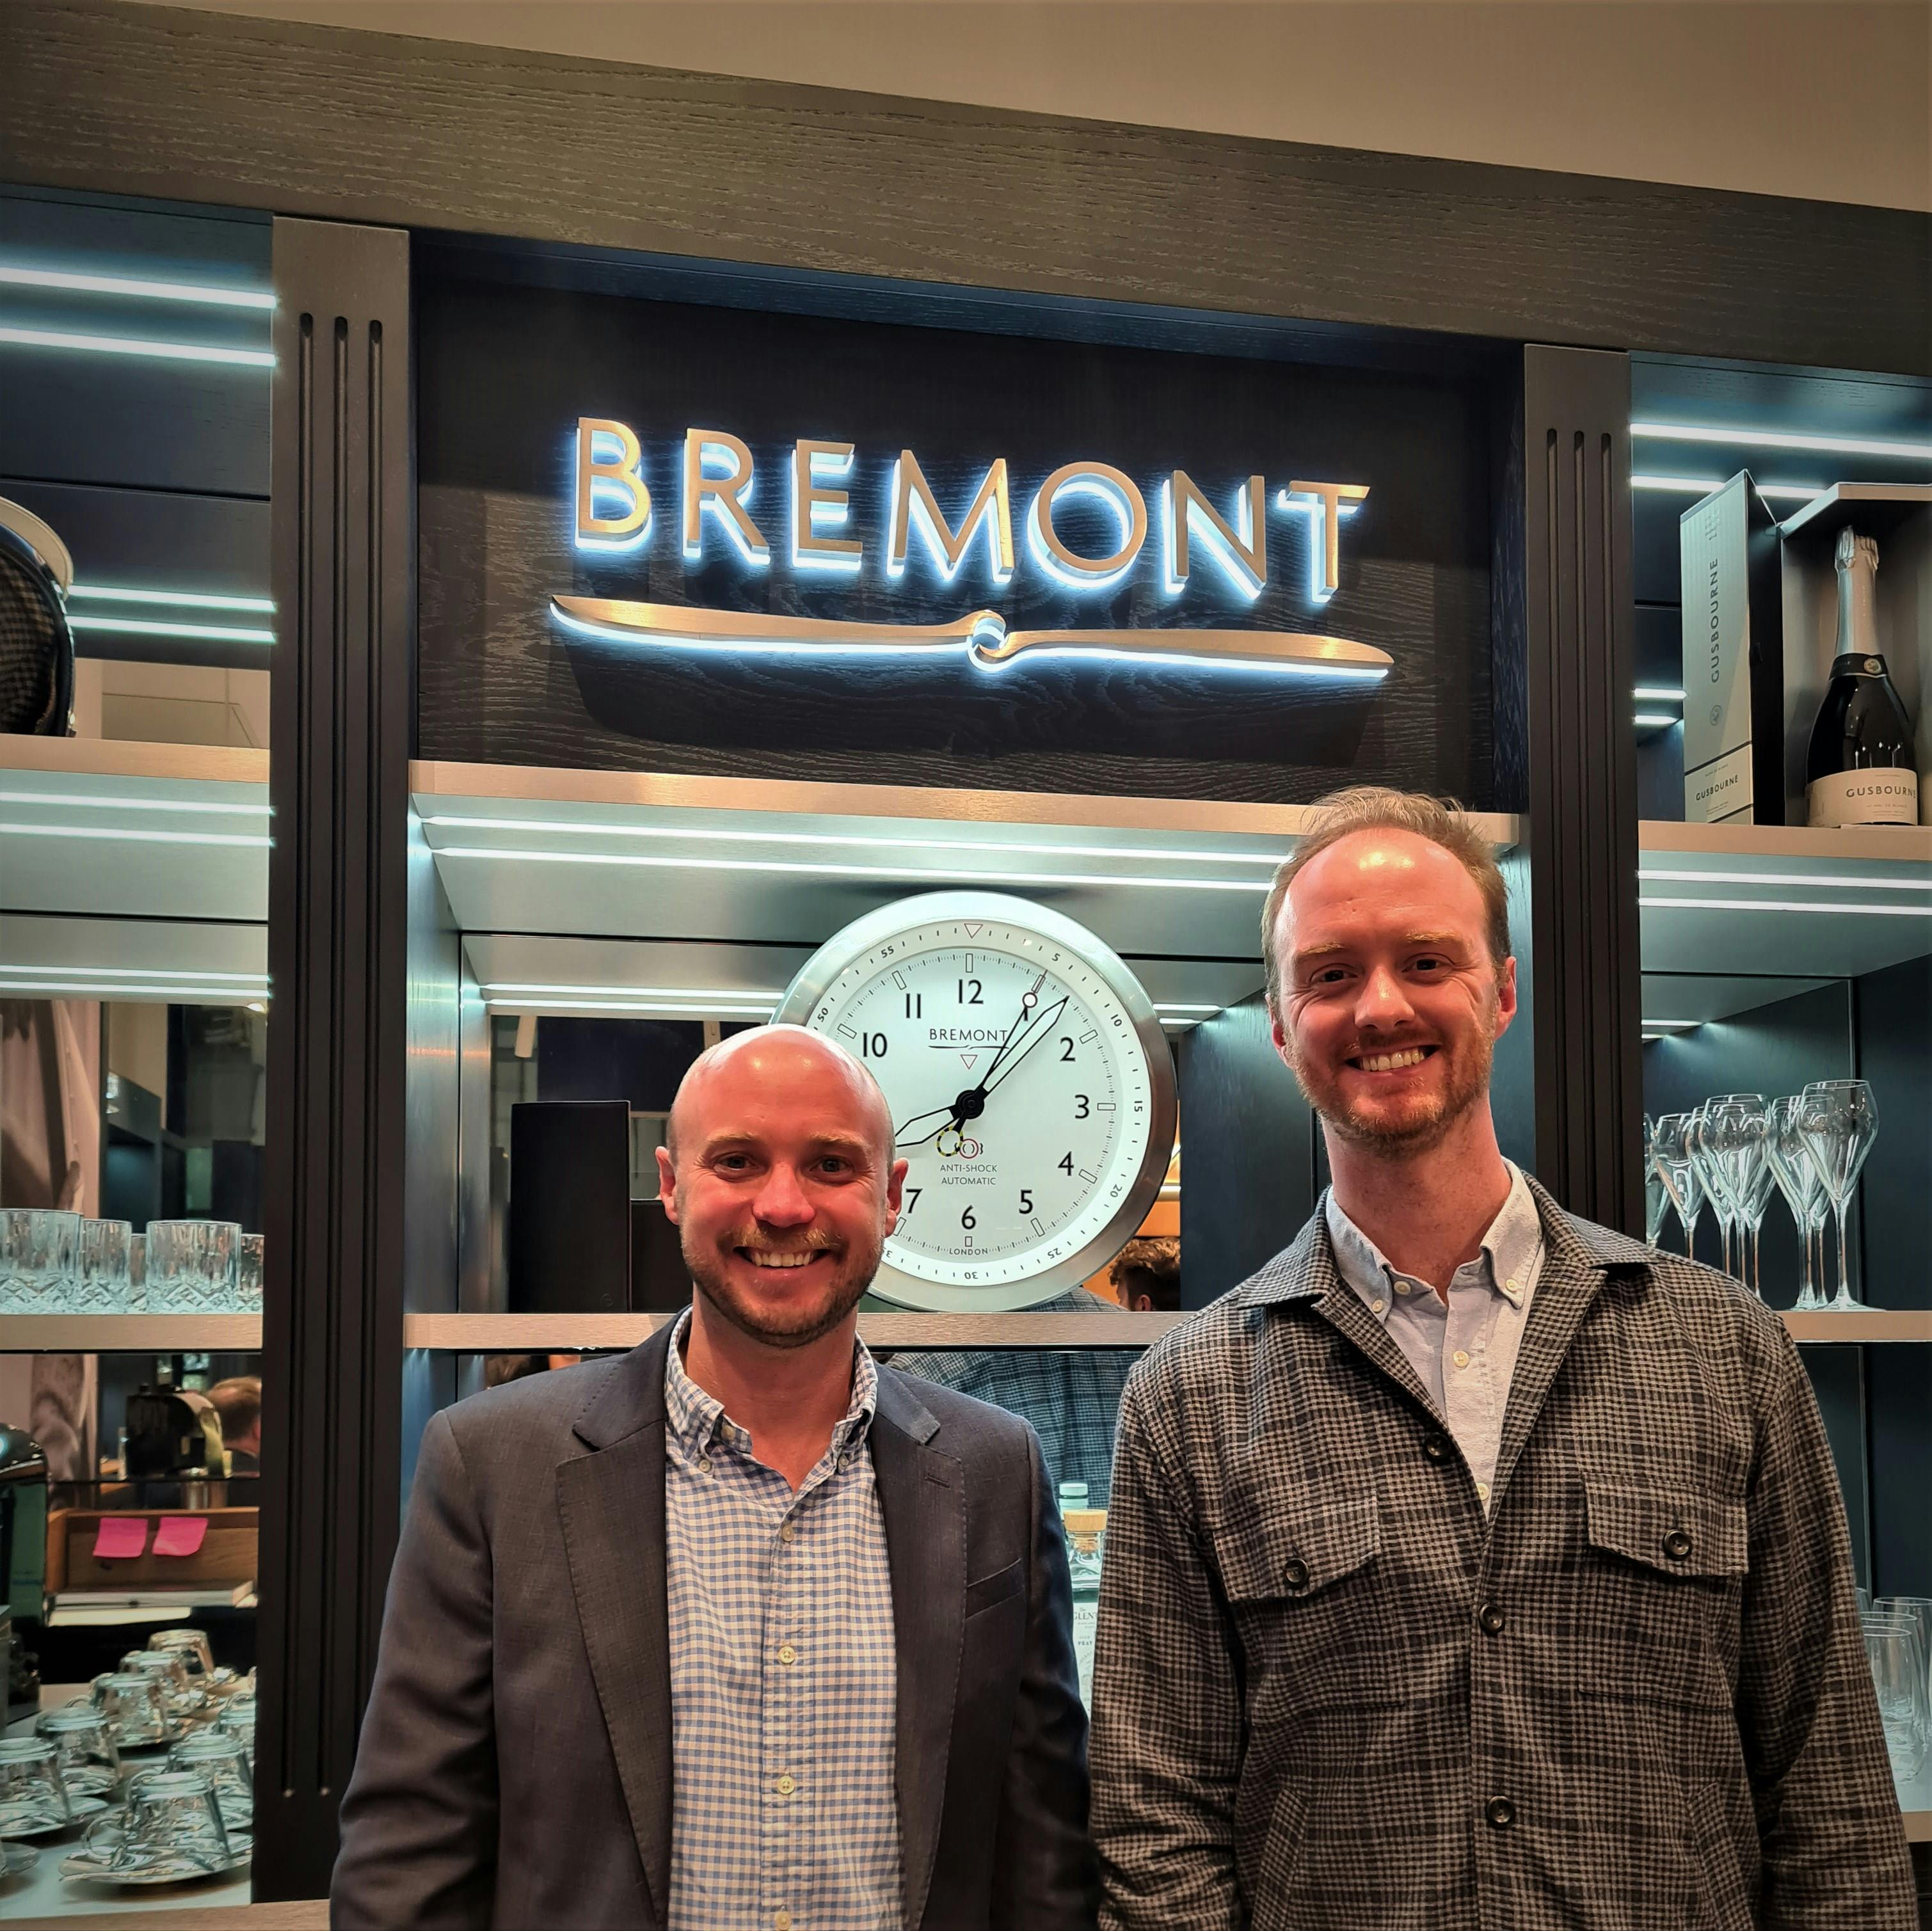 The WCC Co-Founders Hamish and Ed at our recent successful event with Bremont in Birmingham.